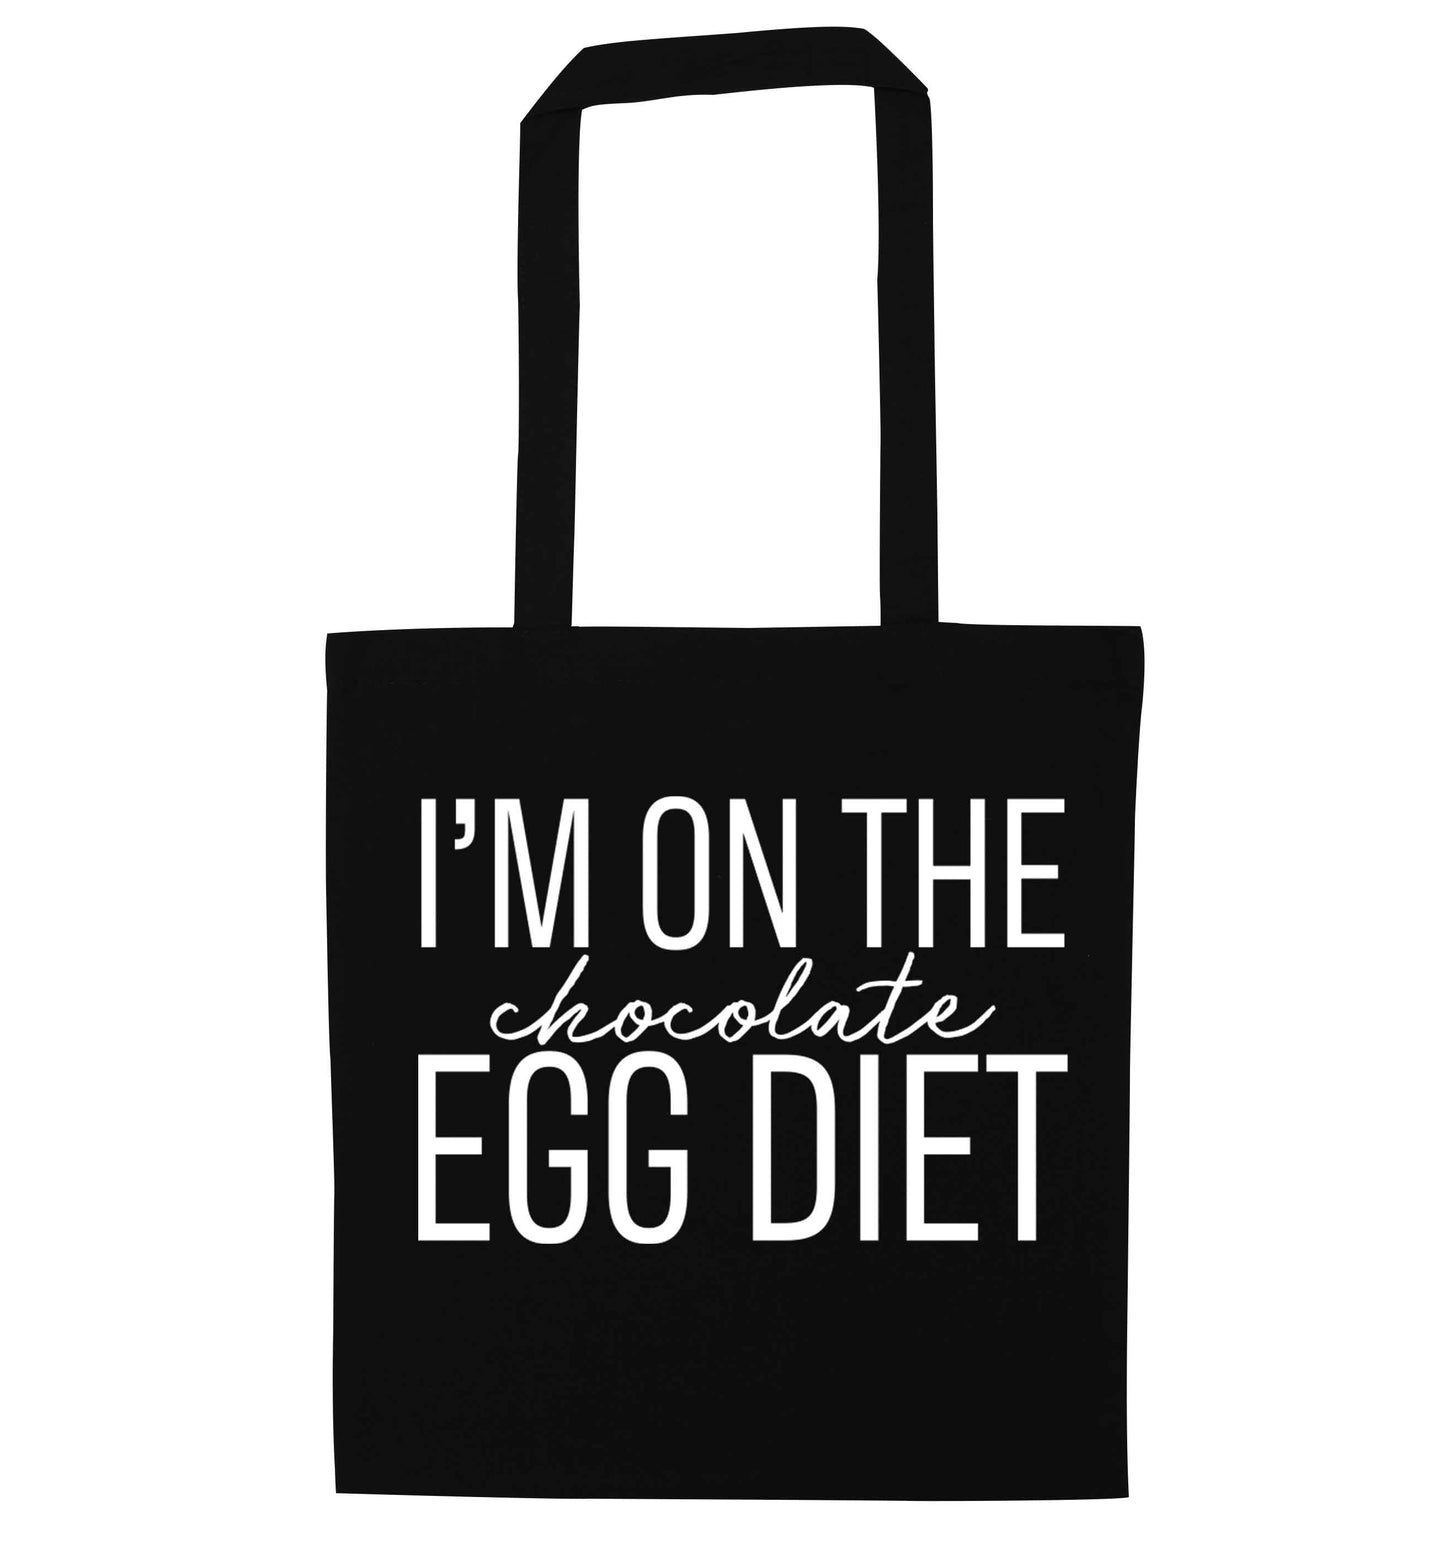 I'm on the chocolate egg diet black tote bag